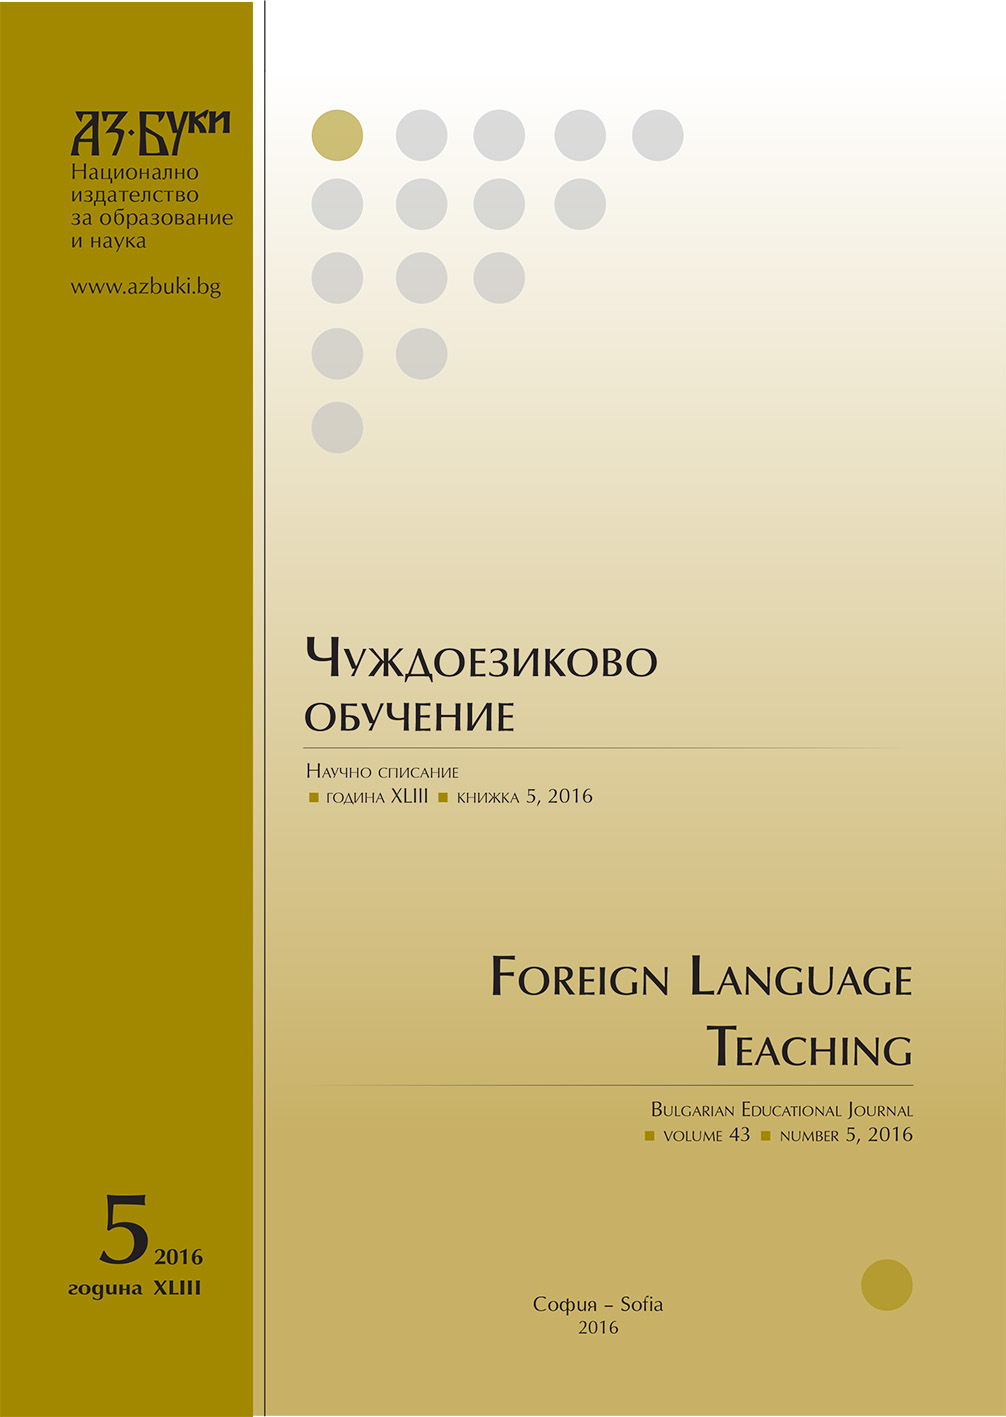 The First German Language Reading Book as a Part of the Bulgarian Methodical Heritage Cover Image